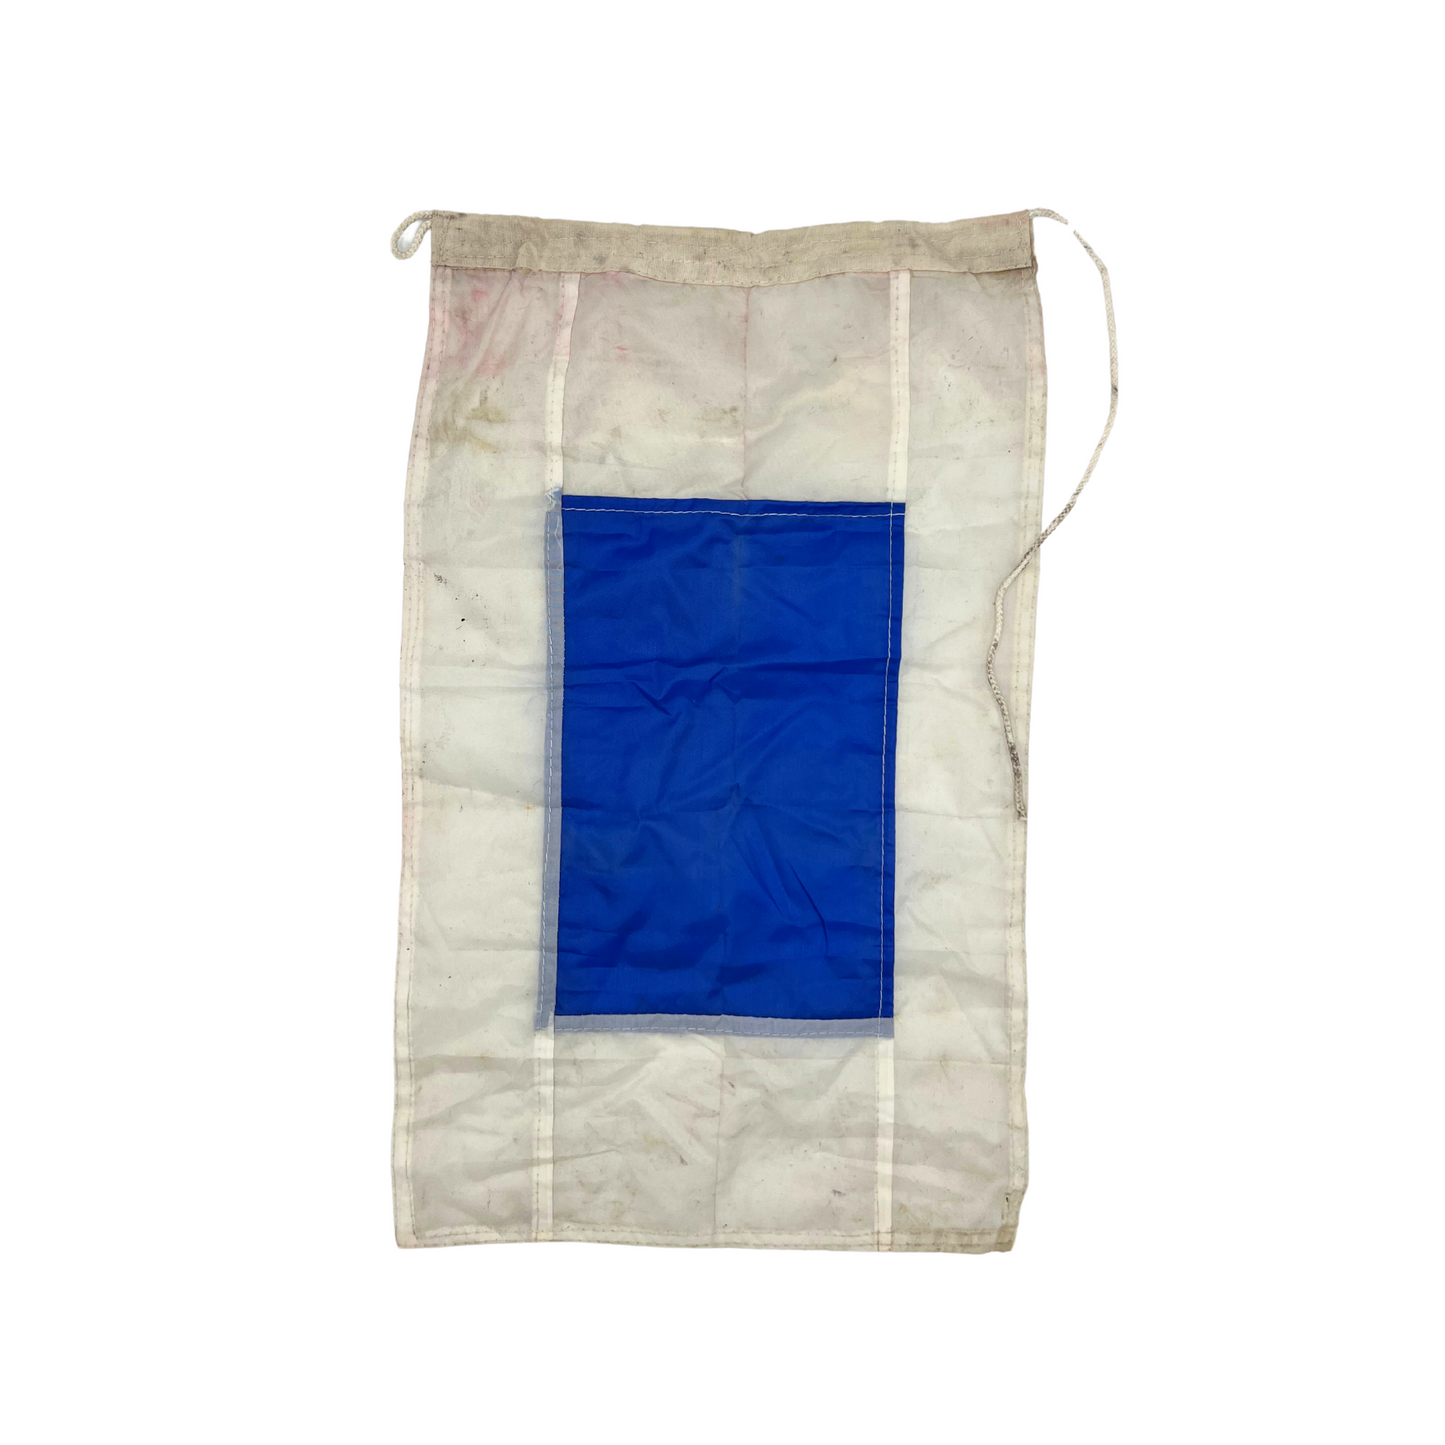 salvaged nautical signal flag - letter S